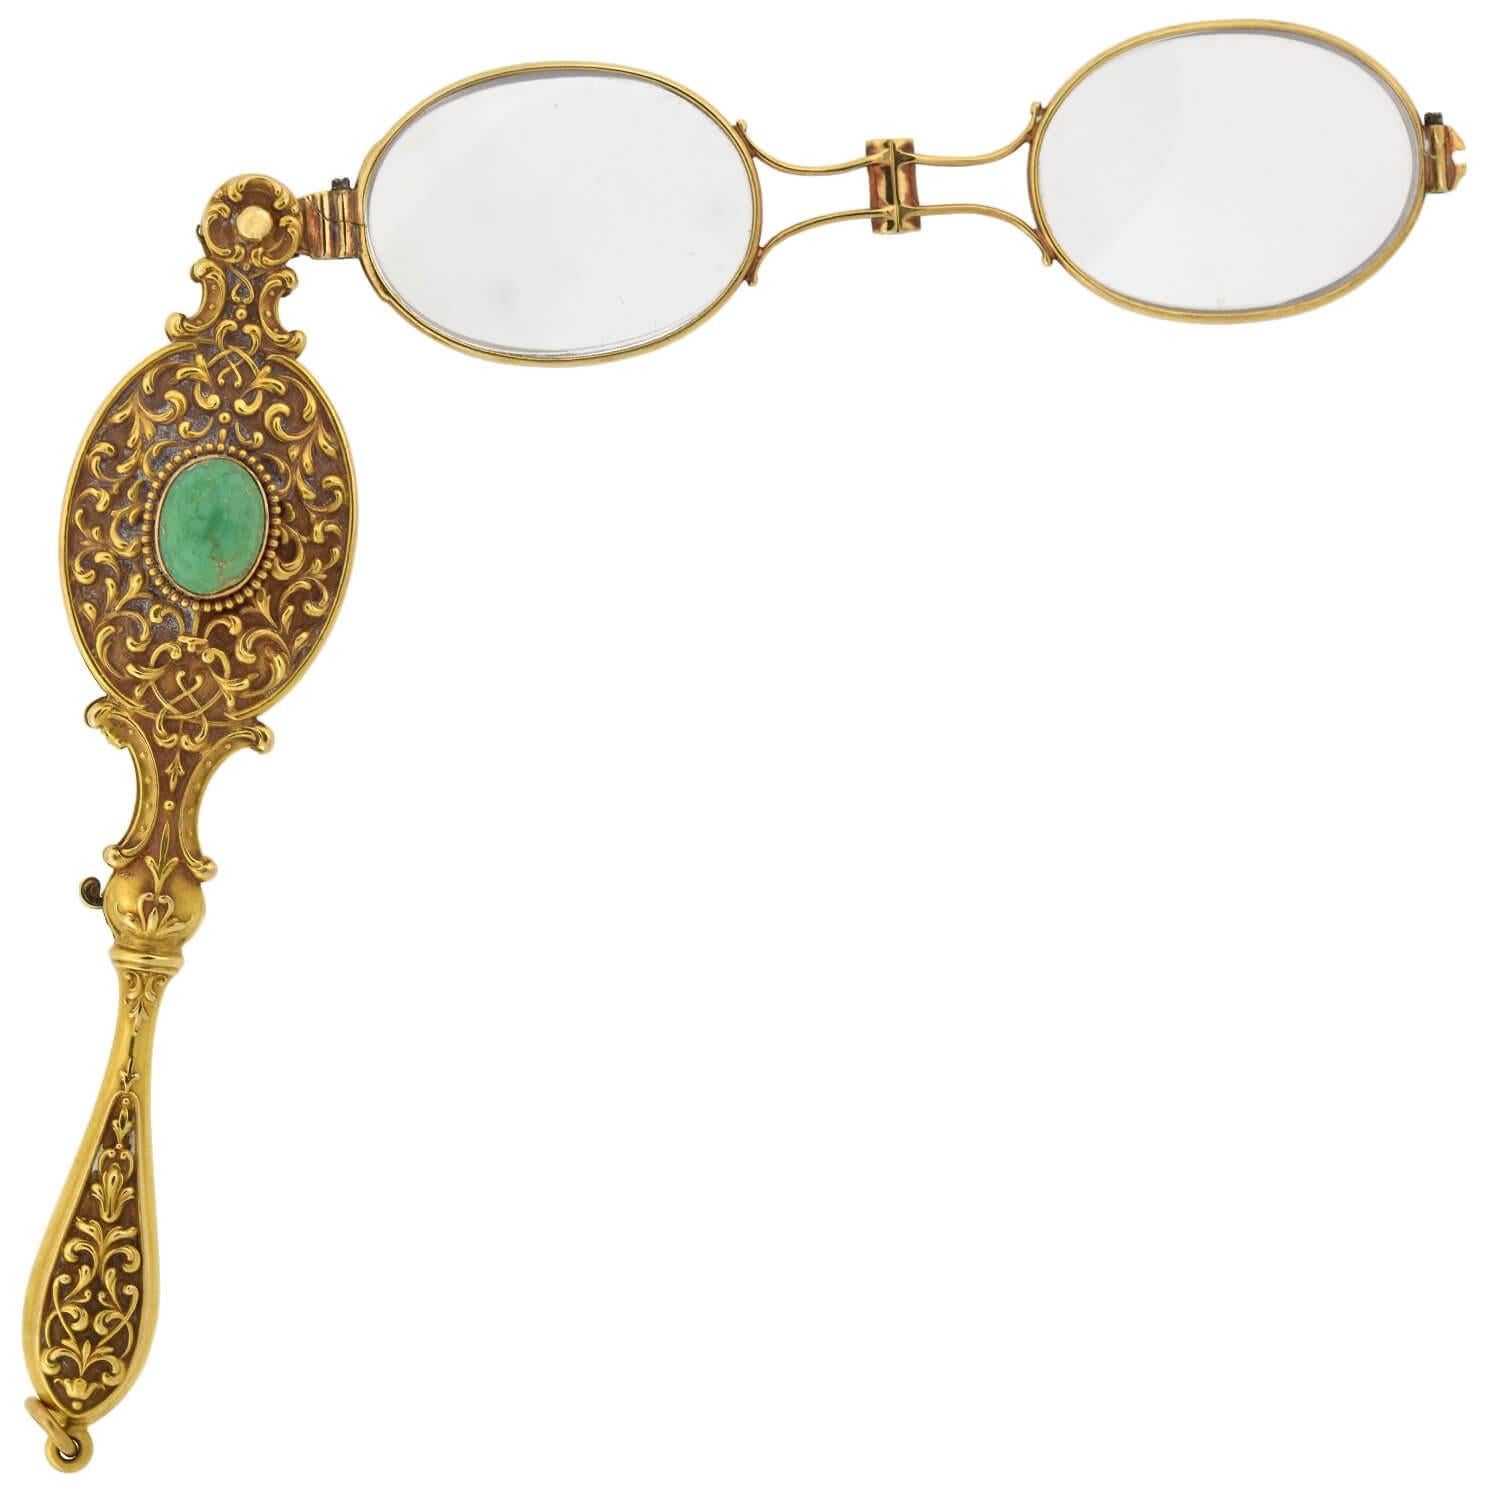 An absolutely fabulous lorgnette from the Art Nouveau (ca1900s) era! Crafted in solid 14kt yellow gold, this incredible piece is comprised of a pair of folding glasses held within a breathtaking textured lorgnette encasement. The lorgnette is